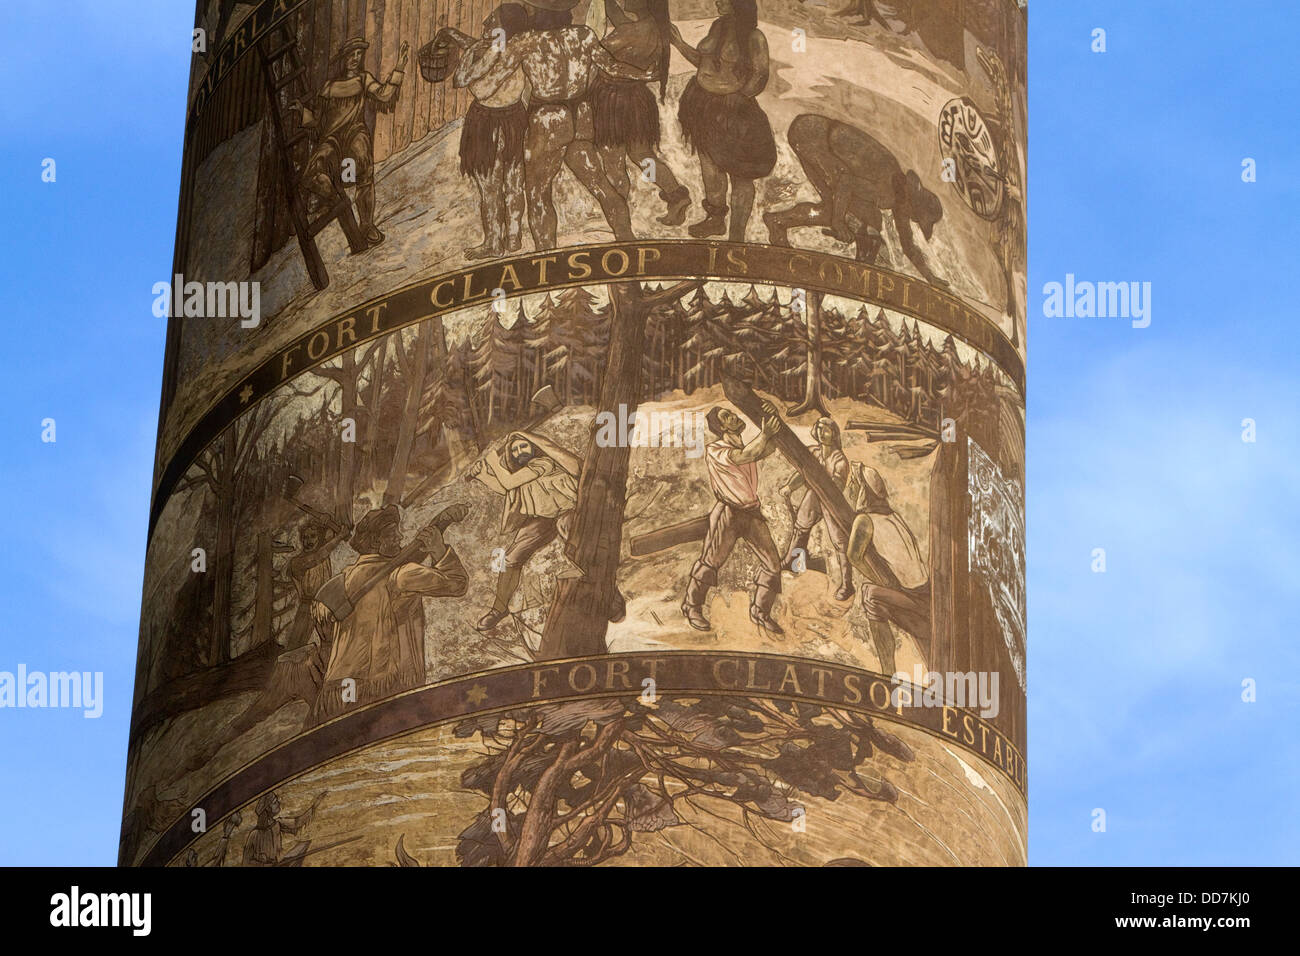 The Astoria Column is a tower overlooking the Columbia River on Coxcomb Hill at Astoria, Oregon, USA. Stock Photo